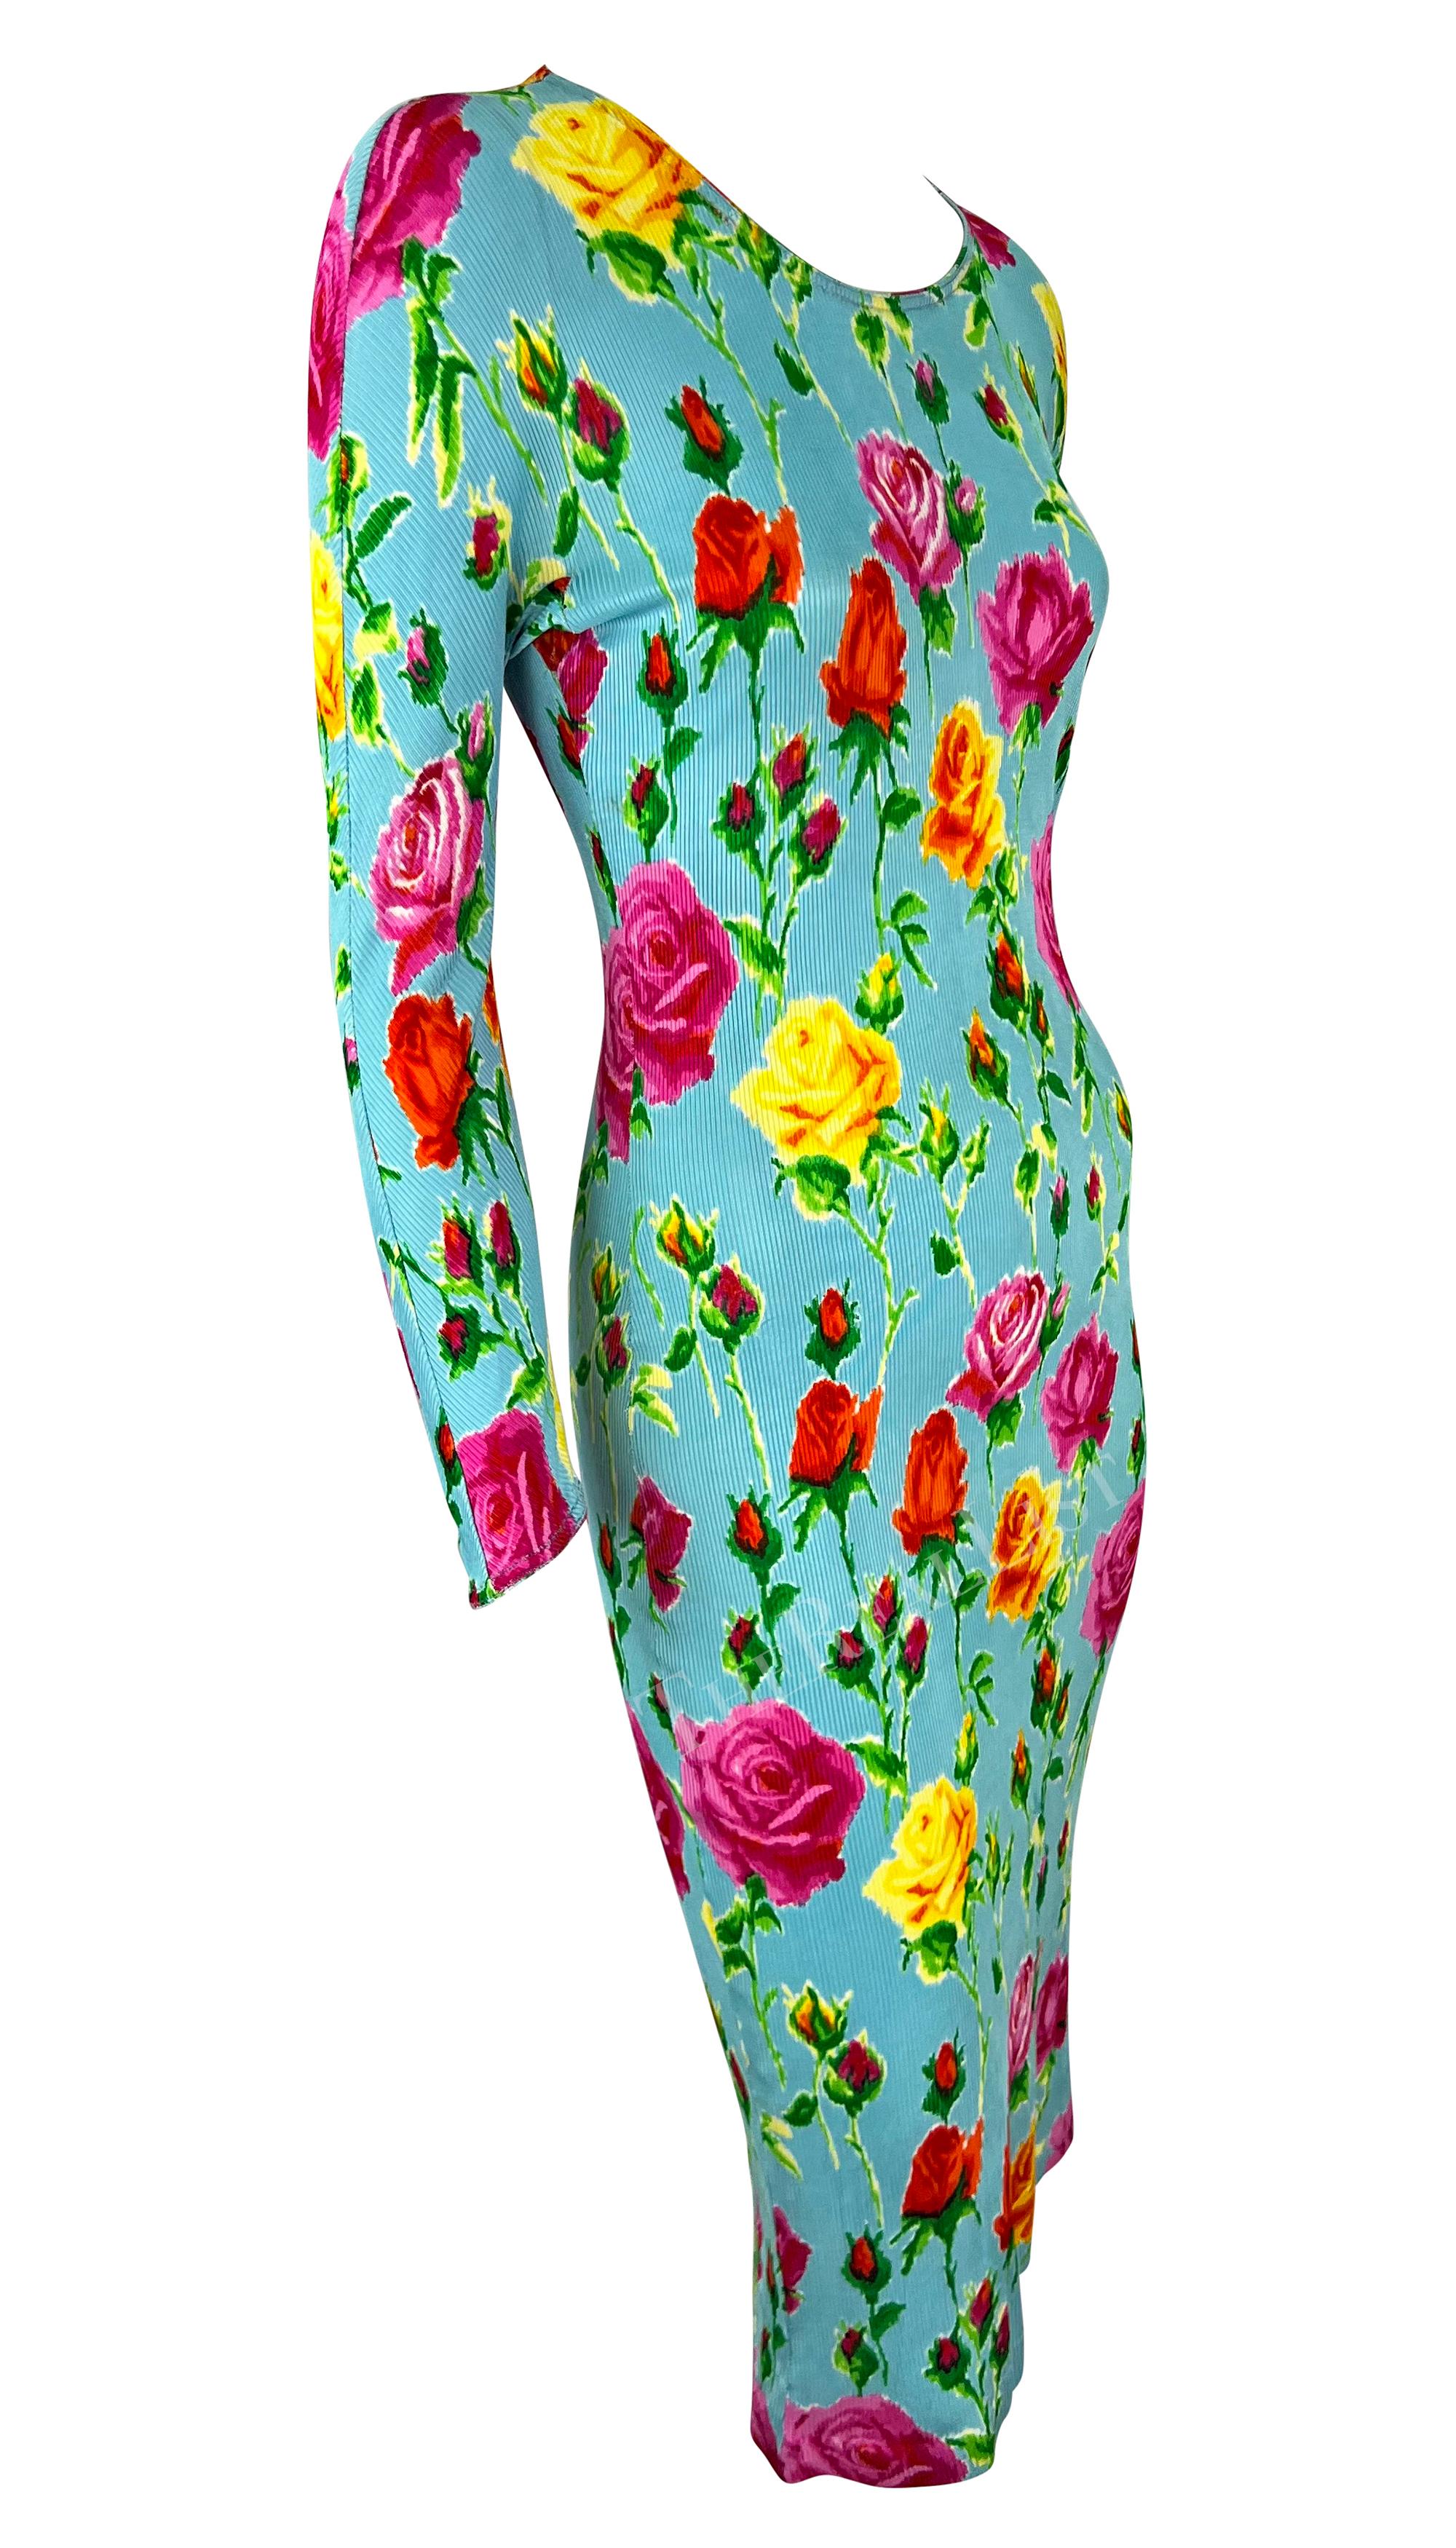 S/S 1995 Gianni Versace Runway Baby Blue Floral Ribbed Bodycon Dress For Sale 4